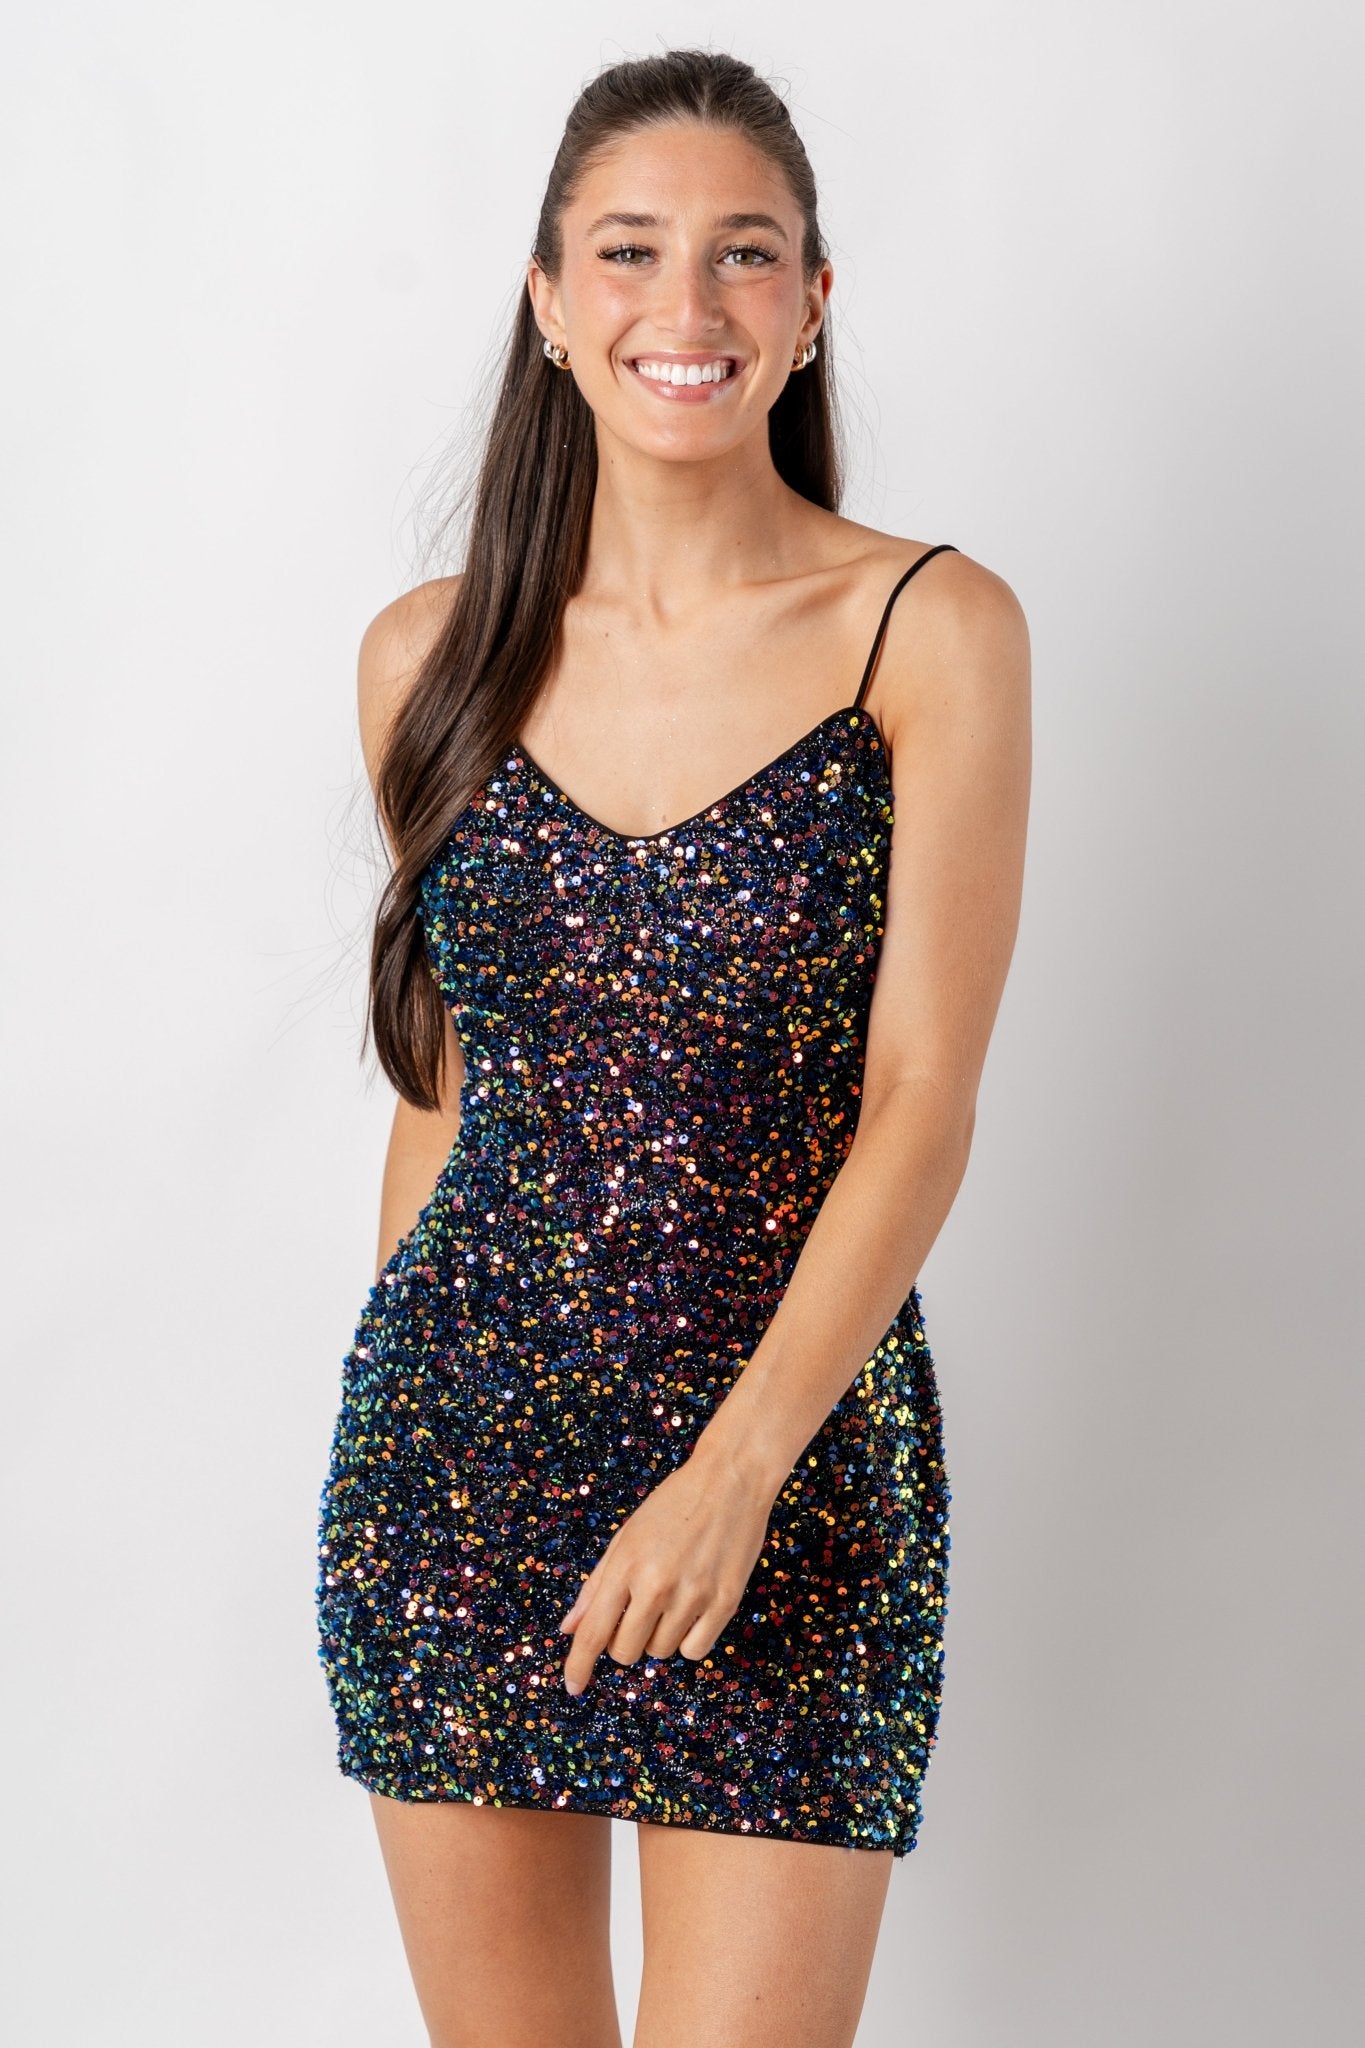 Multi sequin mini dress black - Affordable New Year's Eve Party Outfits at Lush Fashion Lounge Boutique in Oklahoma City